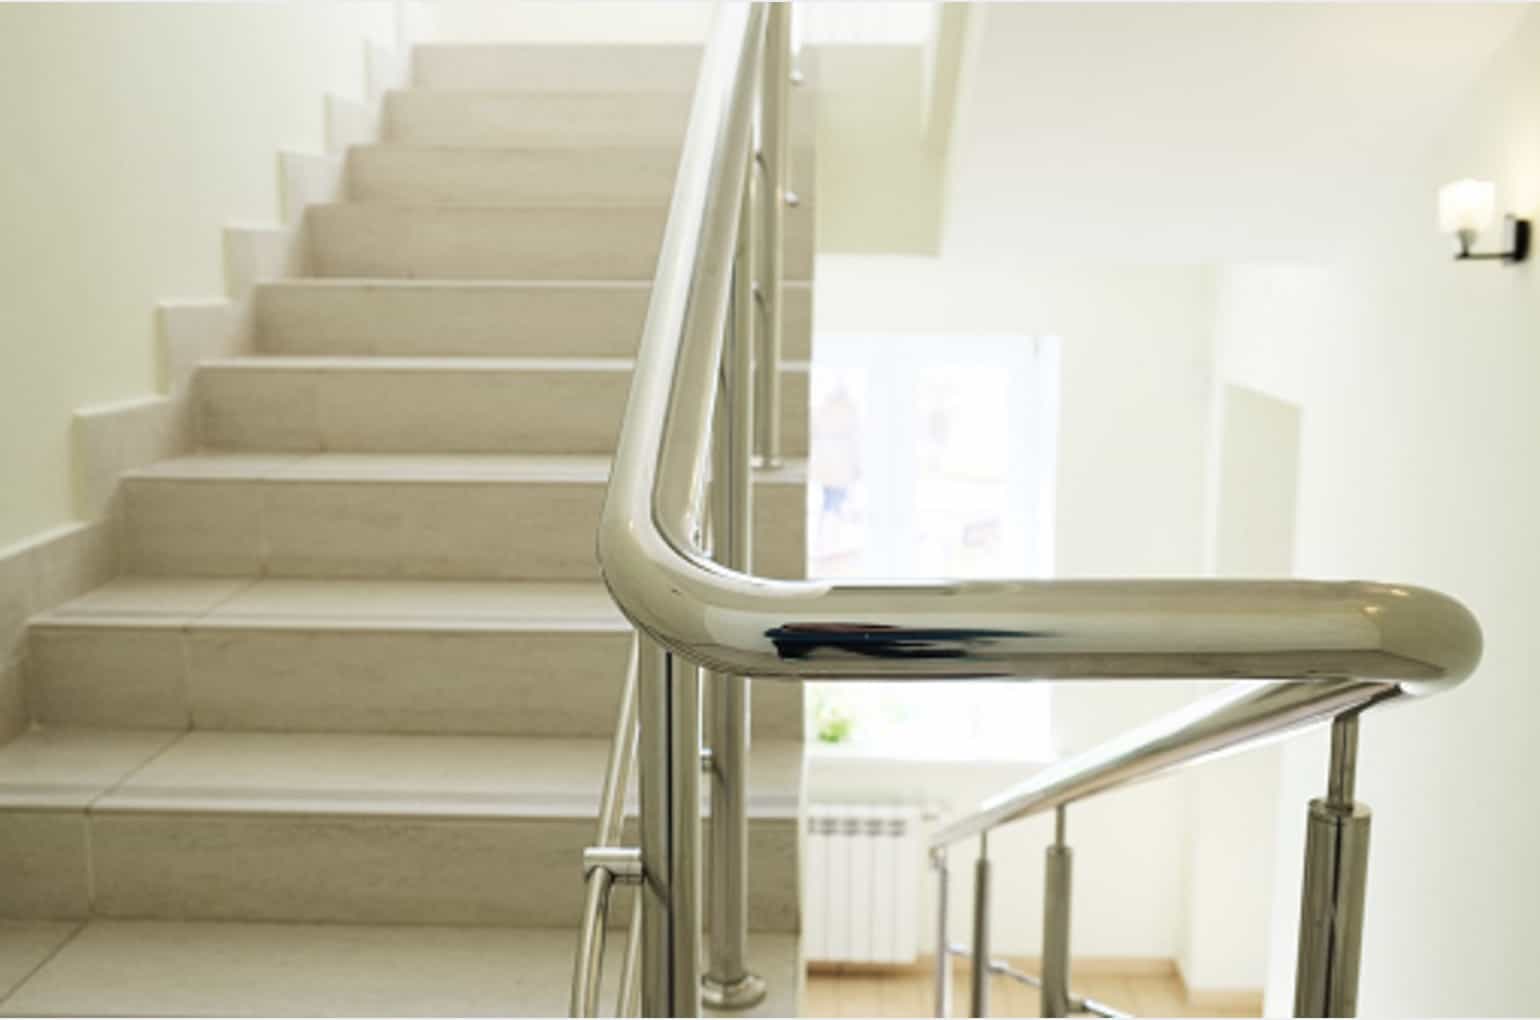 stainless steel balustrade by the stairs